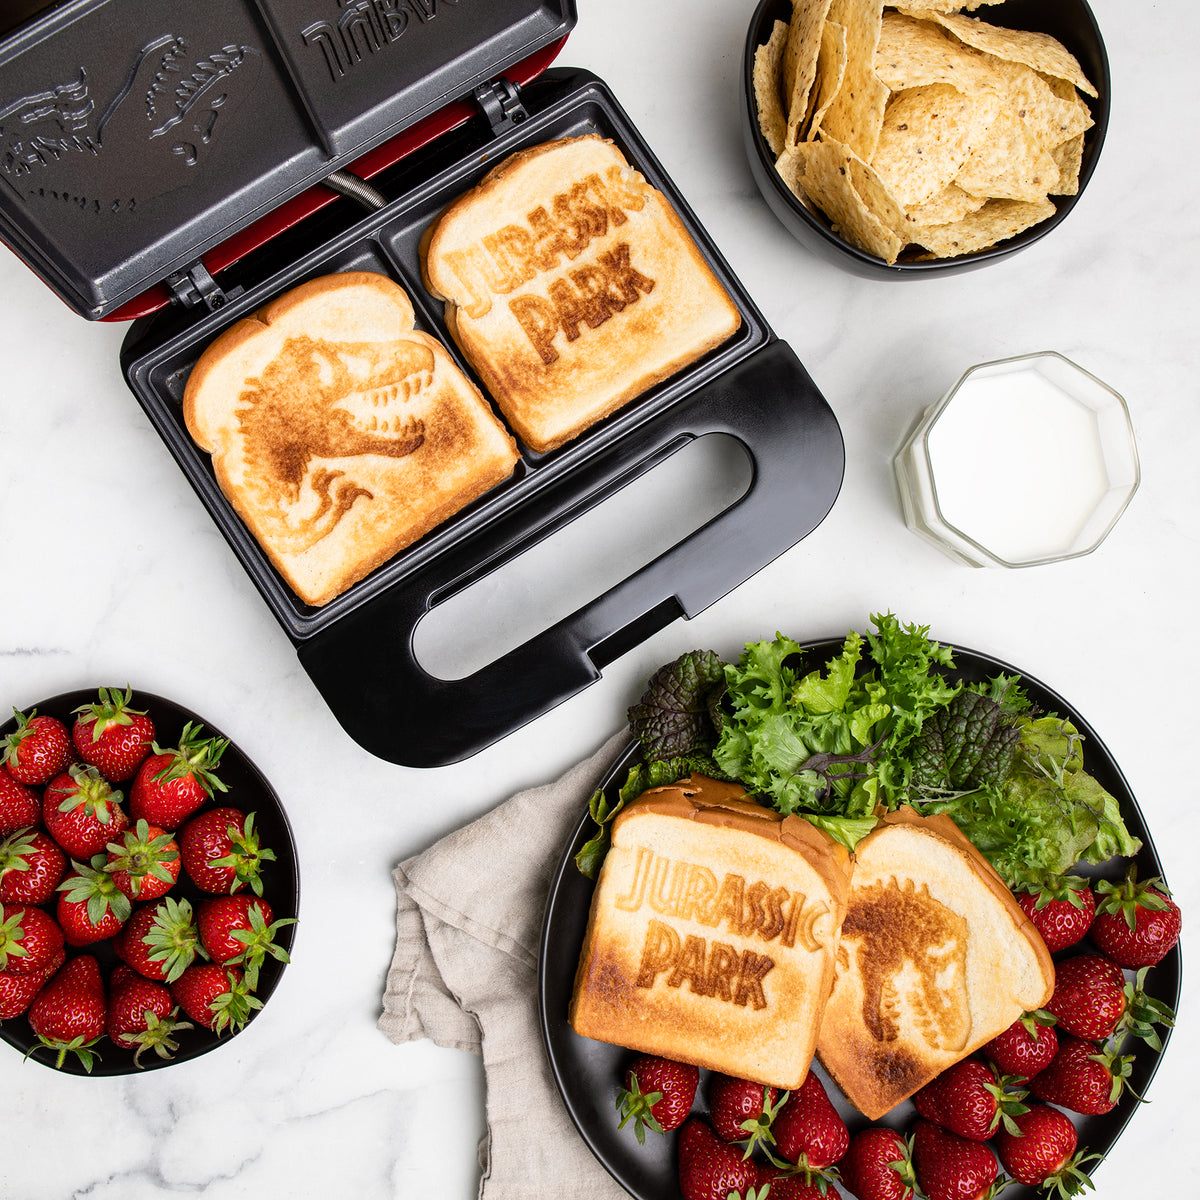 Star Wars The Mandalorian Grilled Cheese Maker - Uncanny Brands